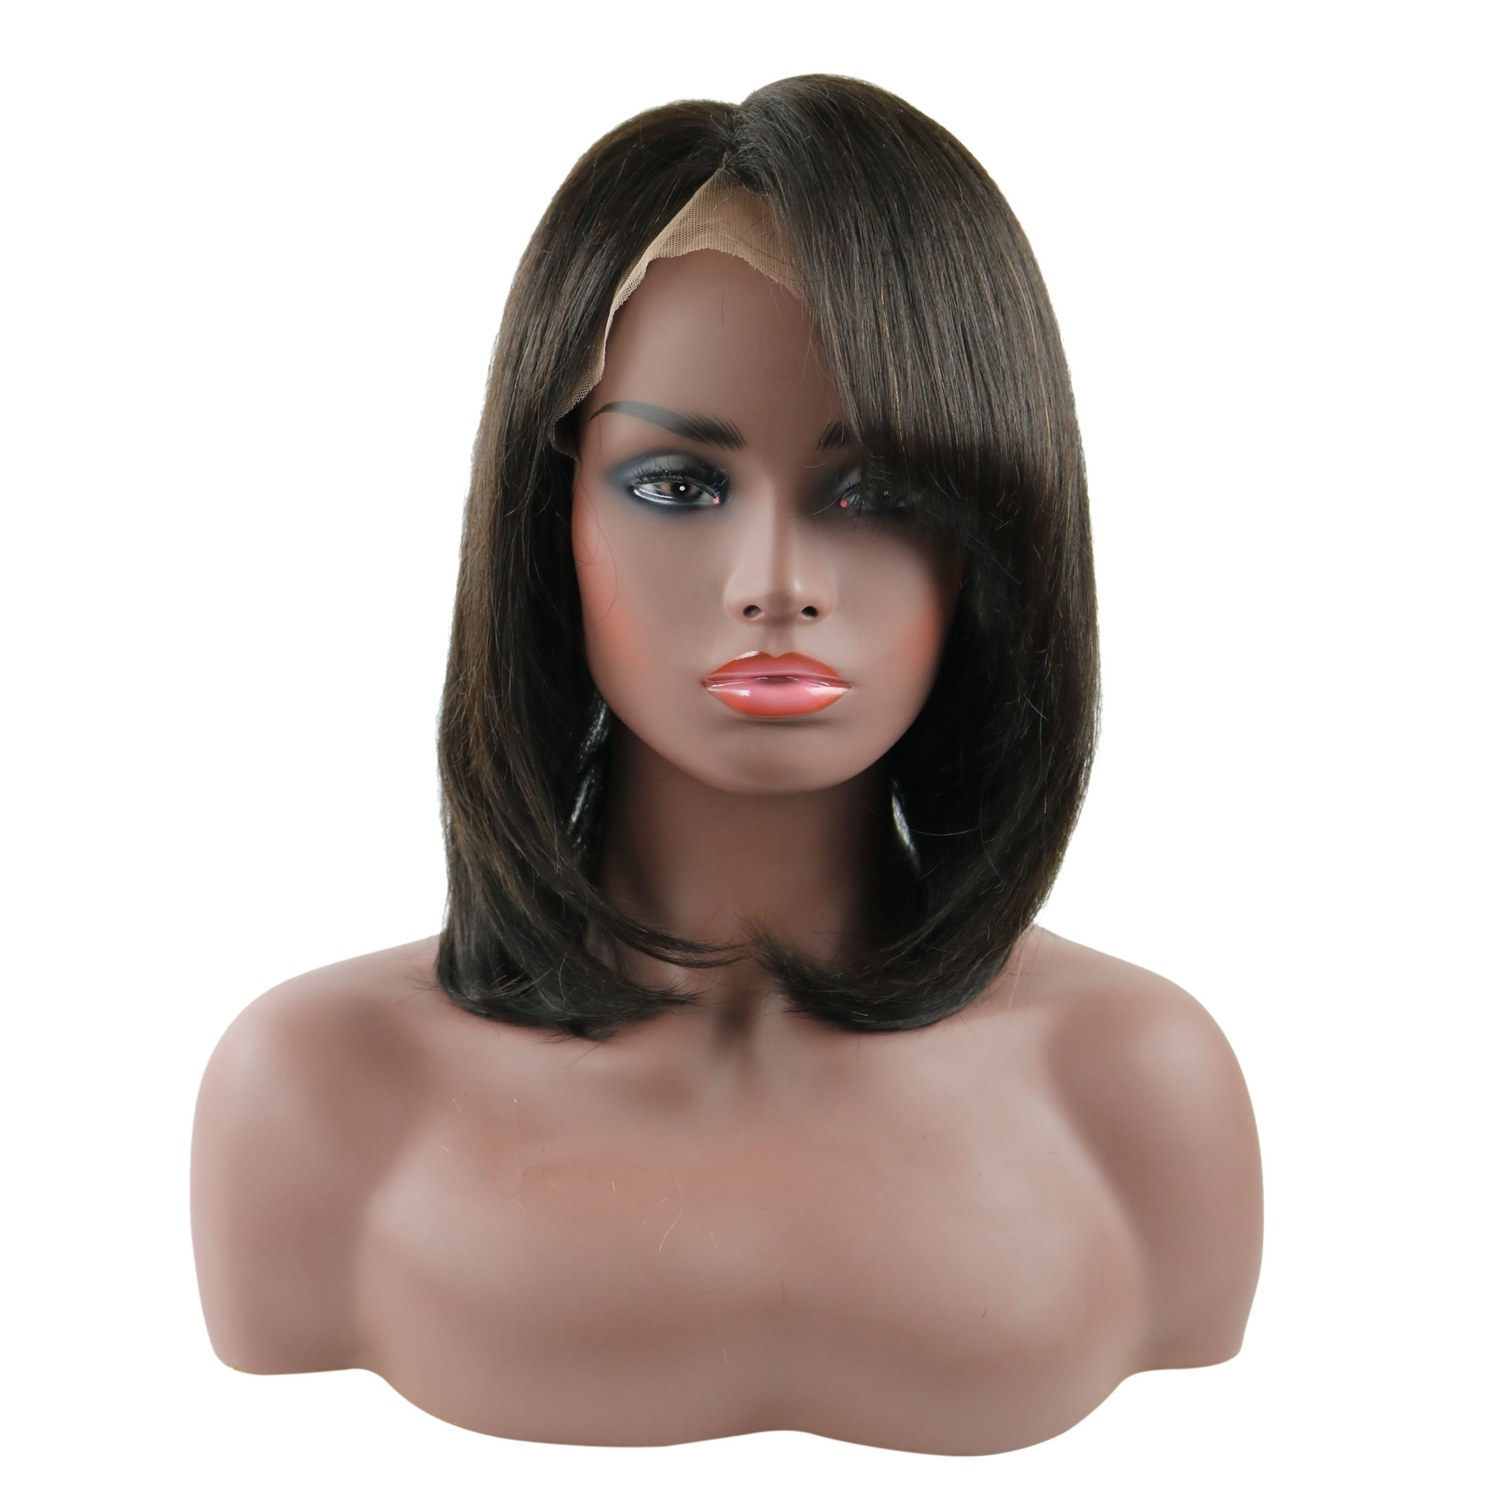 Straight Lace Front Cap Human Hair 120% 12 Inches Wigs